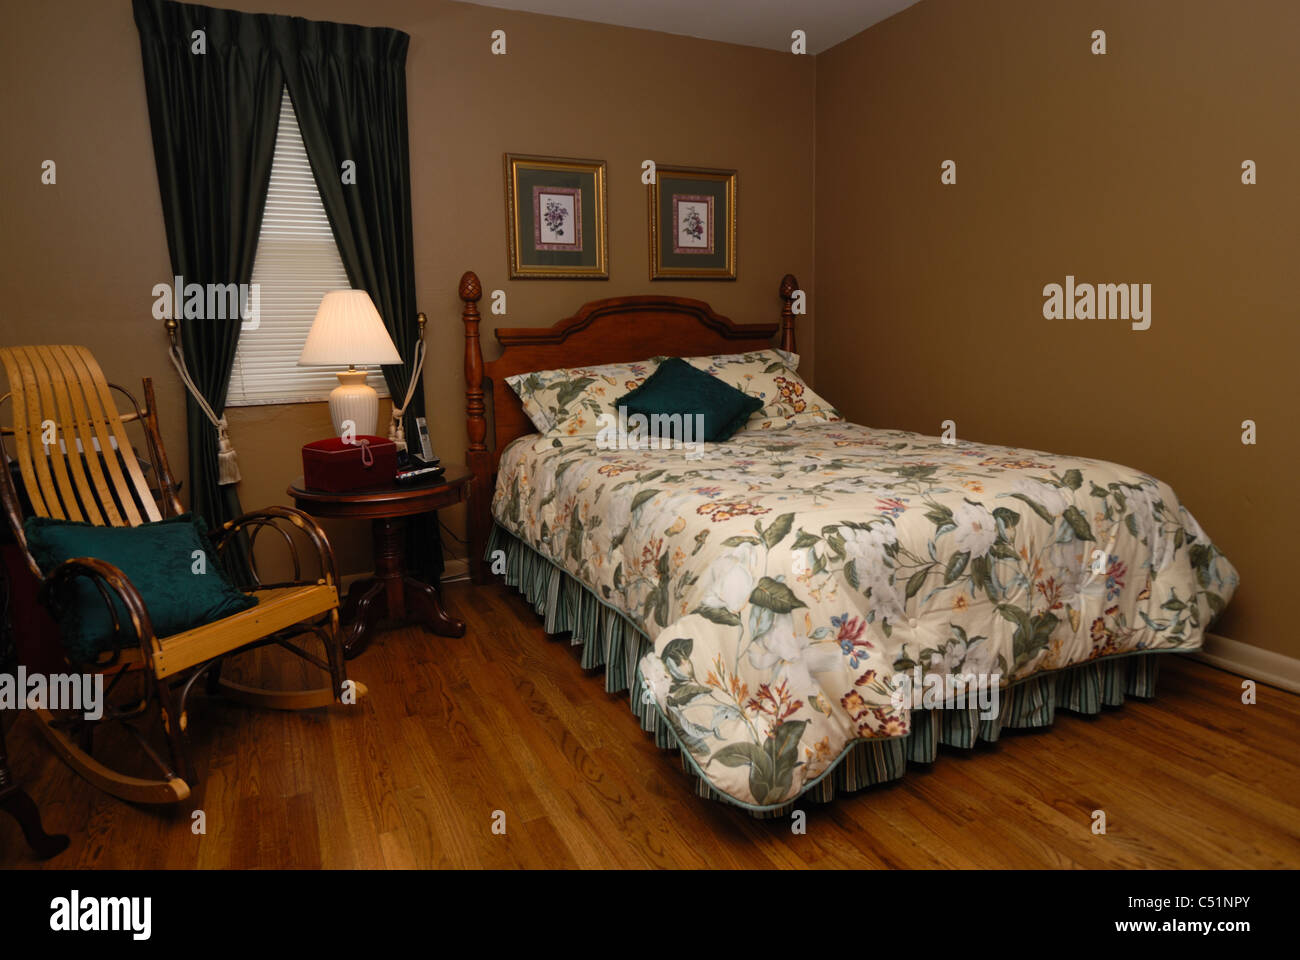 A wide angle shot of the interior of a home, a bedroom decorated in pale yellow and dark green. Stock Photo